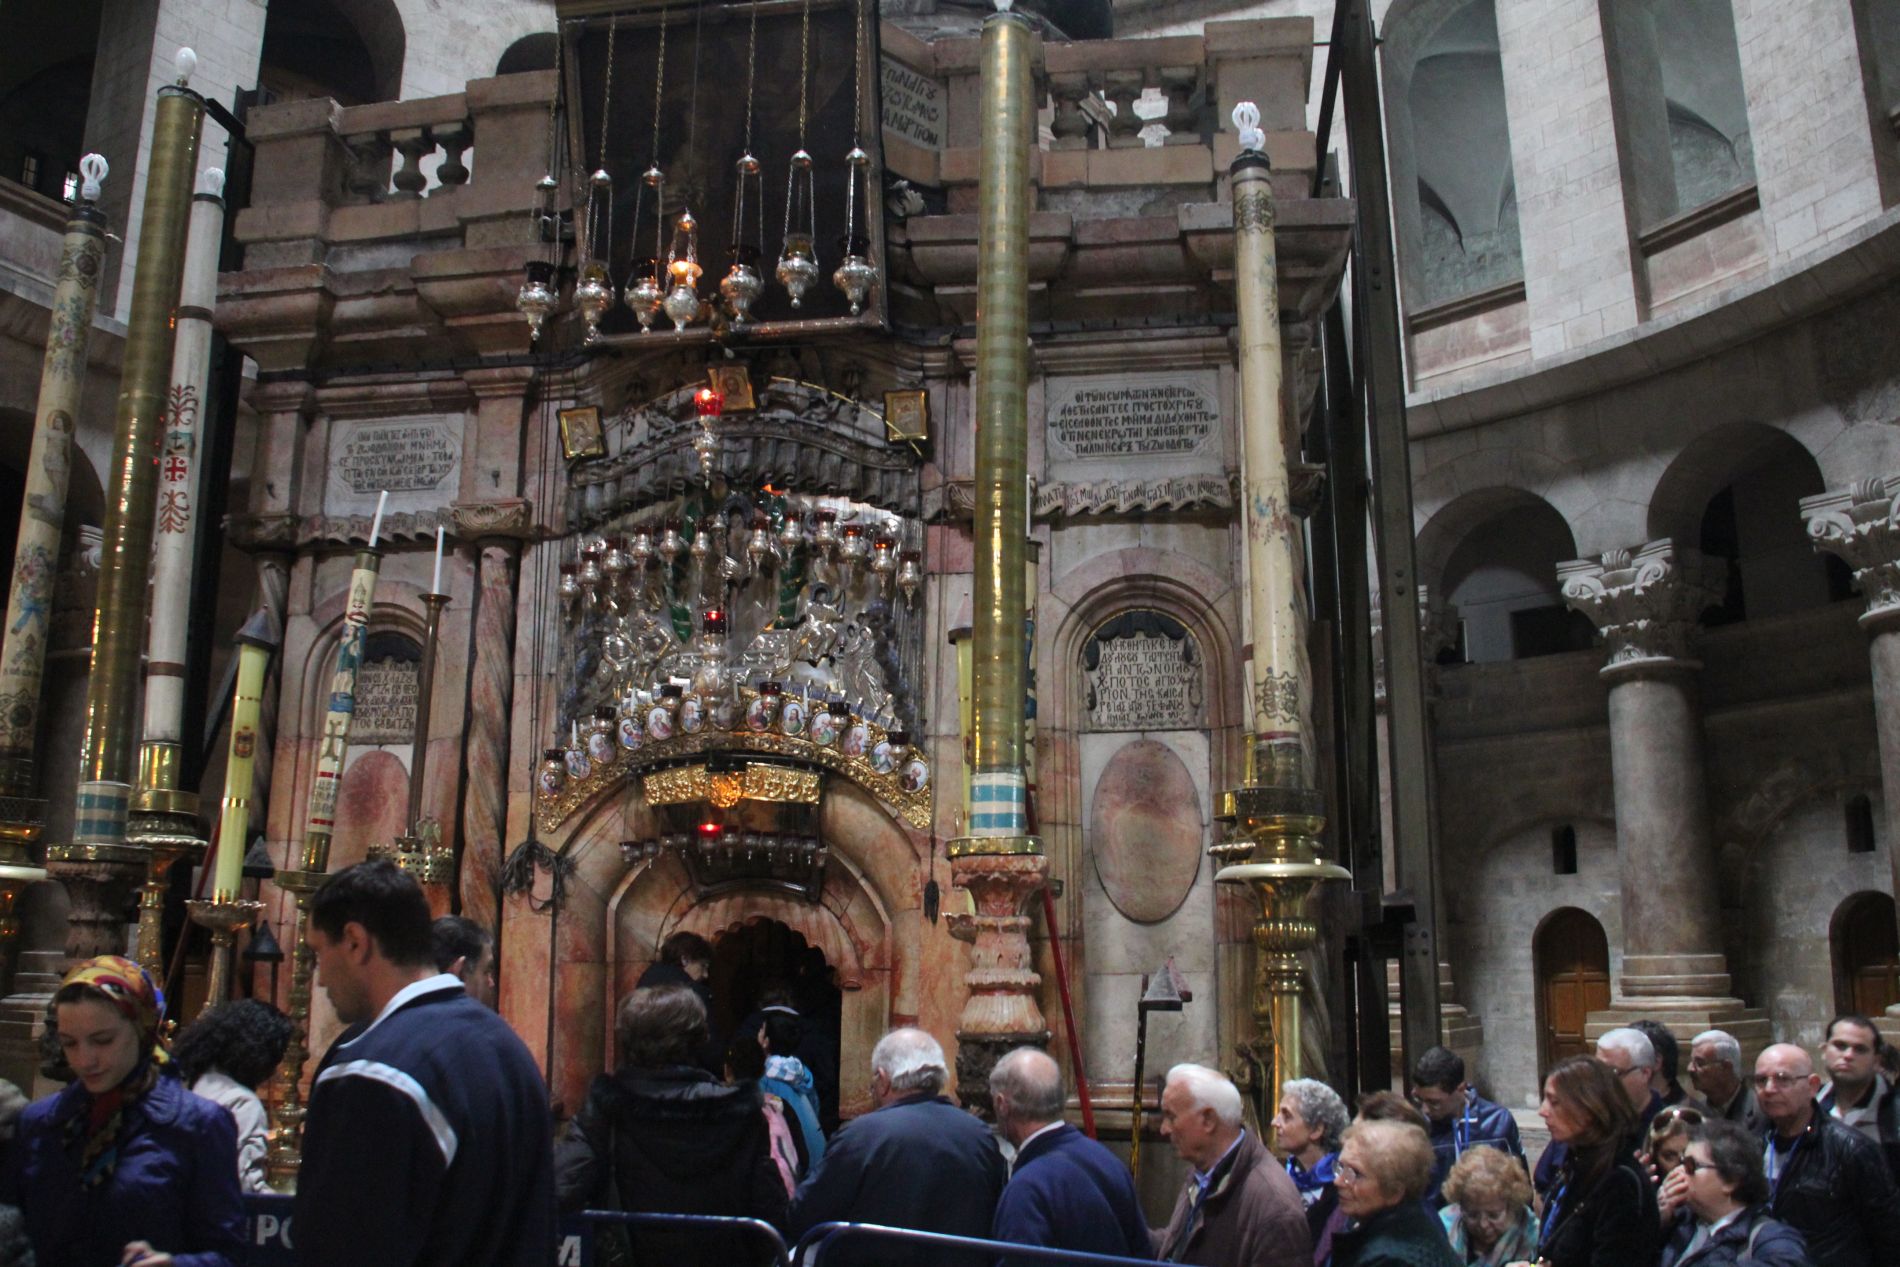 Tourists wait in the Church of the Holy Sepulchre to enter the Edicule, the alleged Tomb of Jesus.